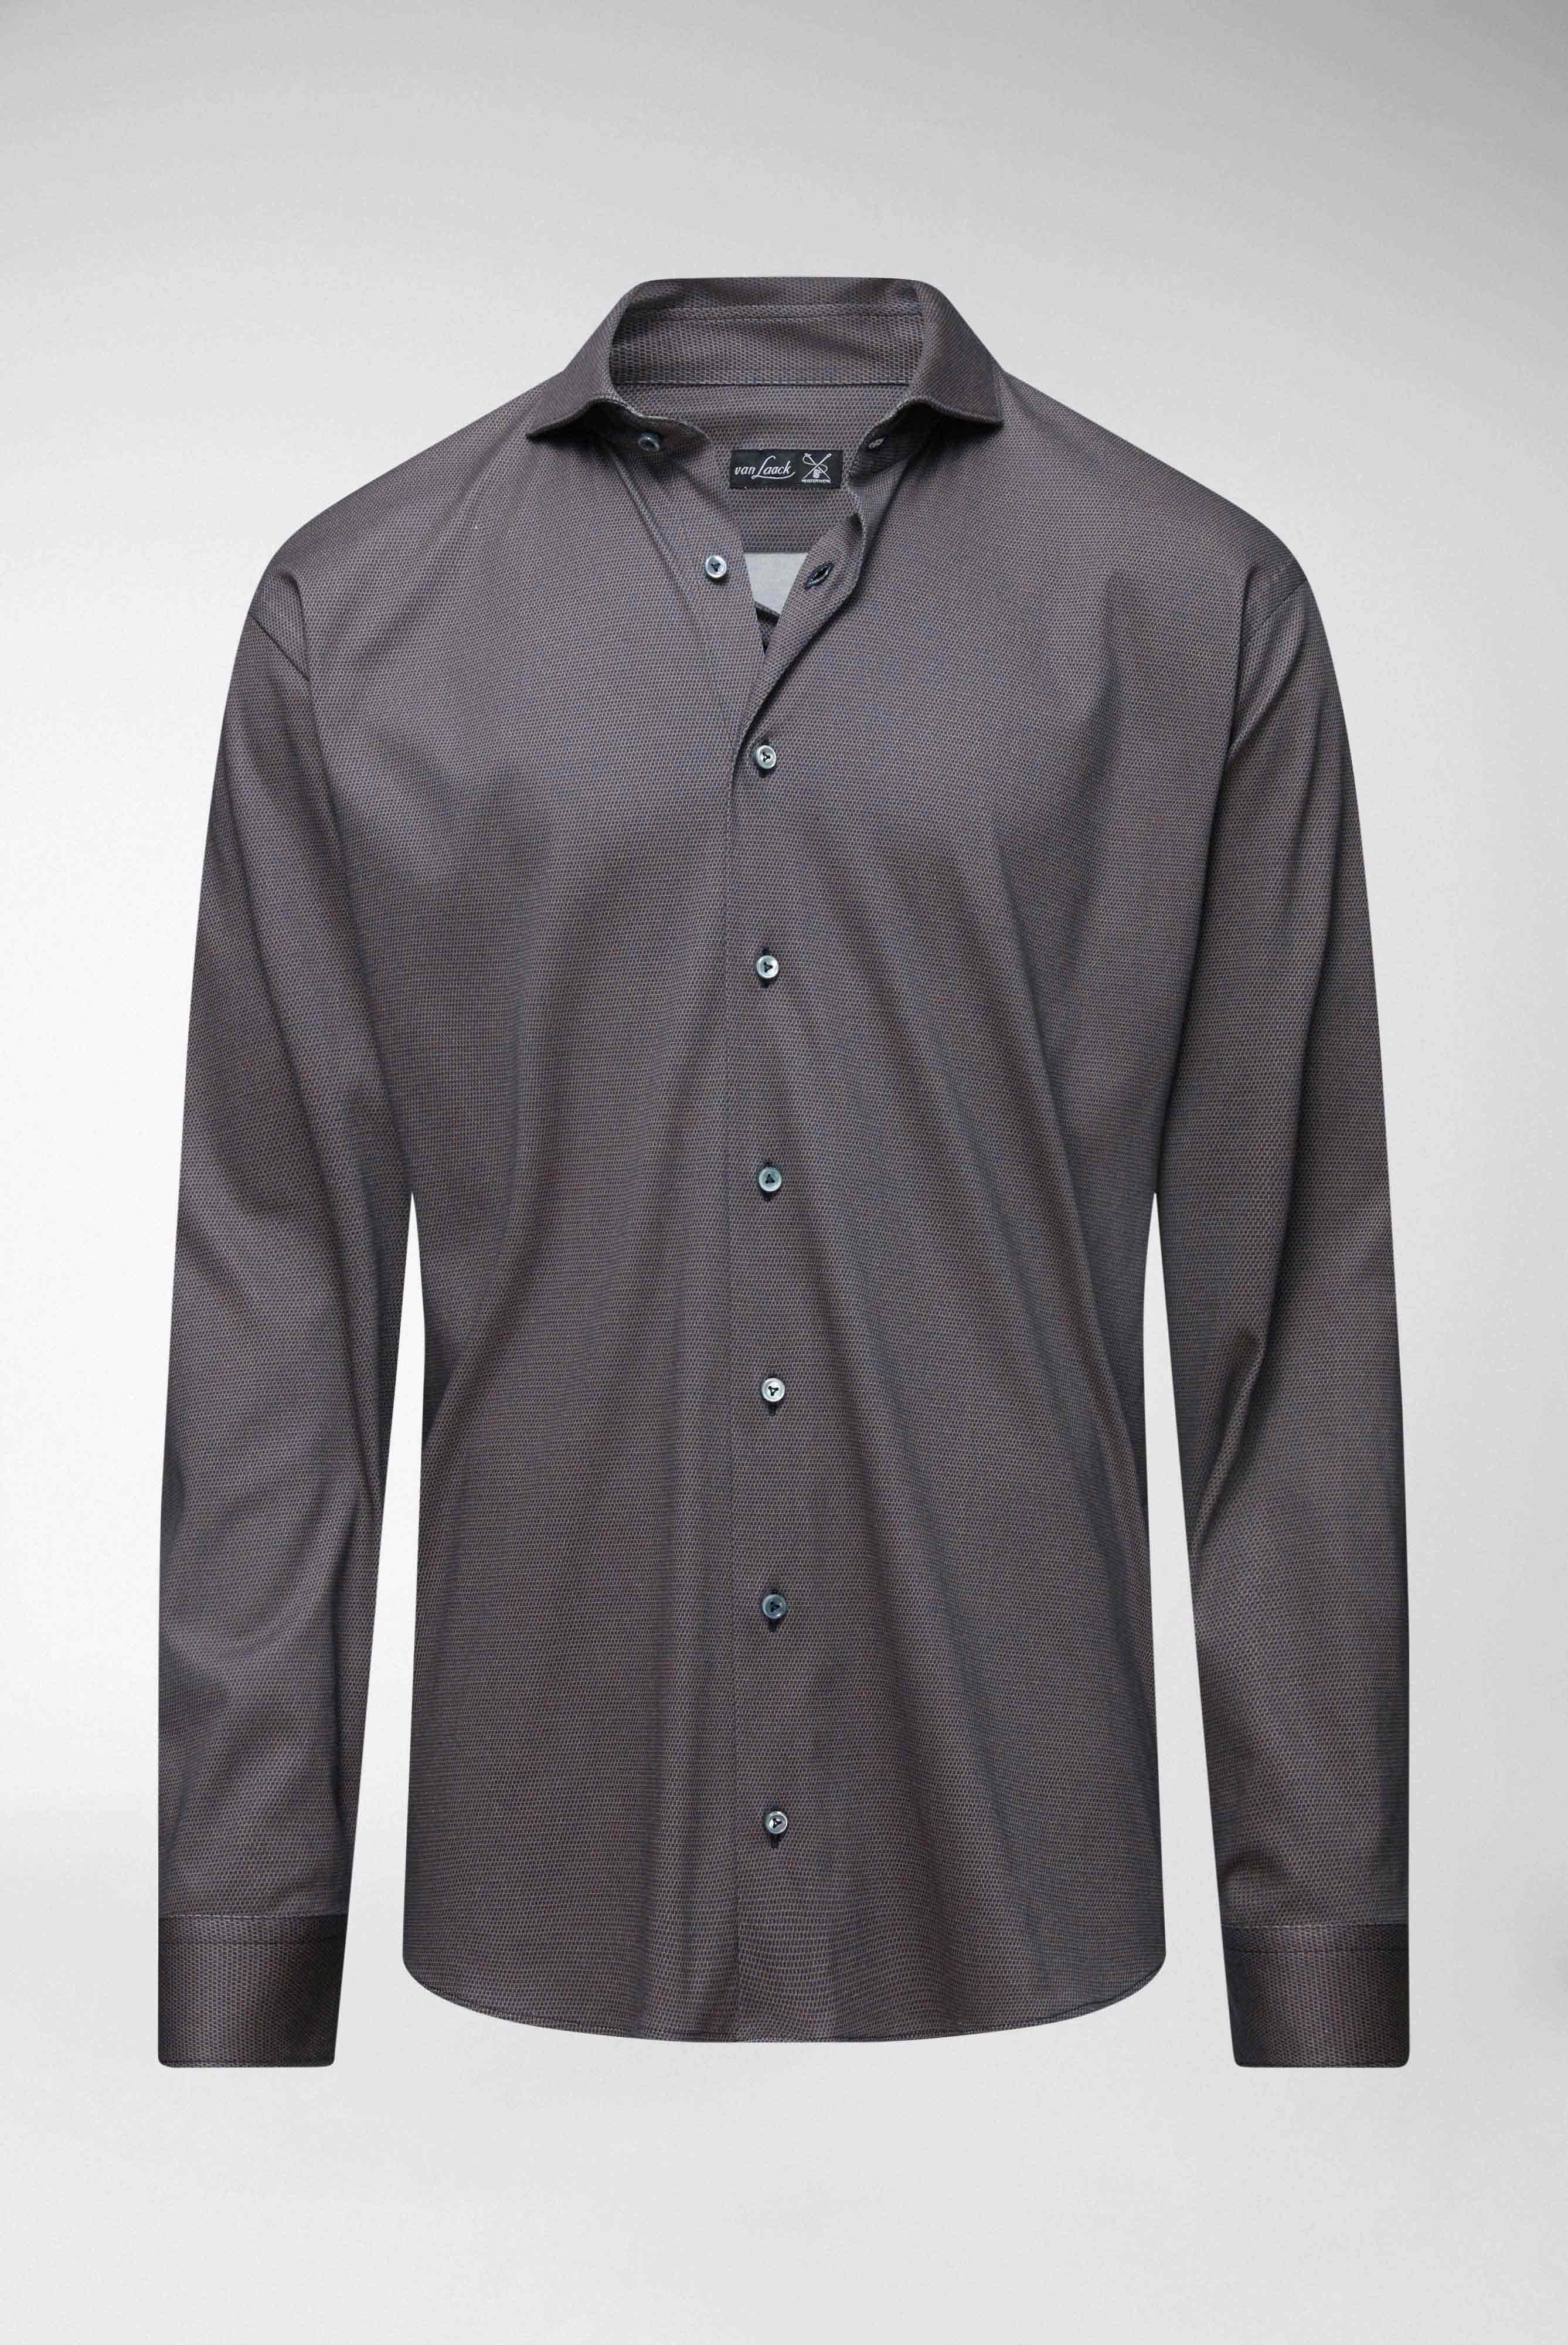 Casual Shirts+Micro Printed Jersey Shirt Tailor Fit+20.1683.UC.187551.160.M